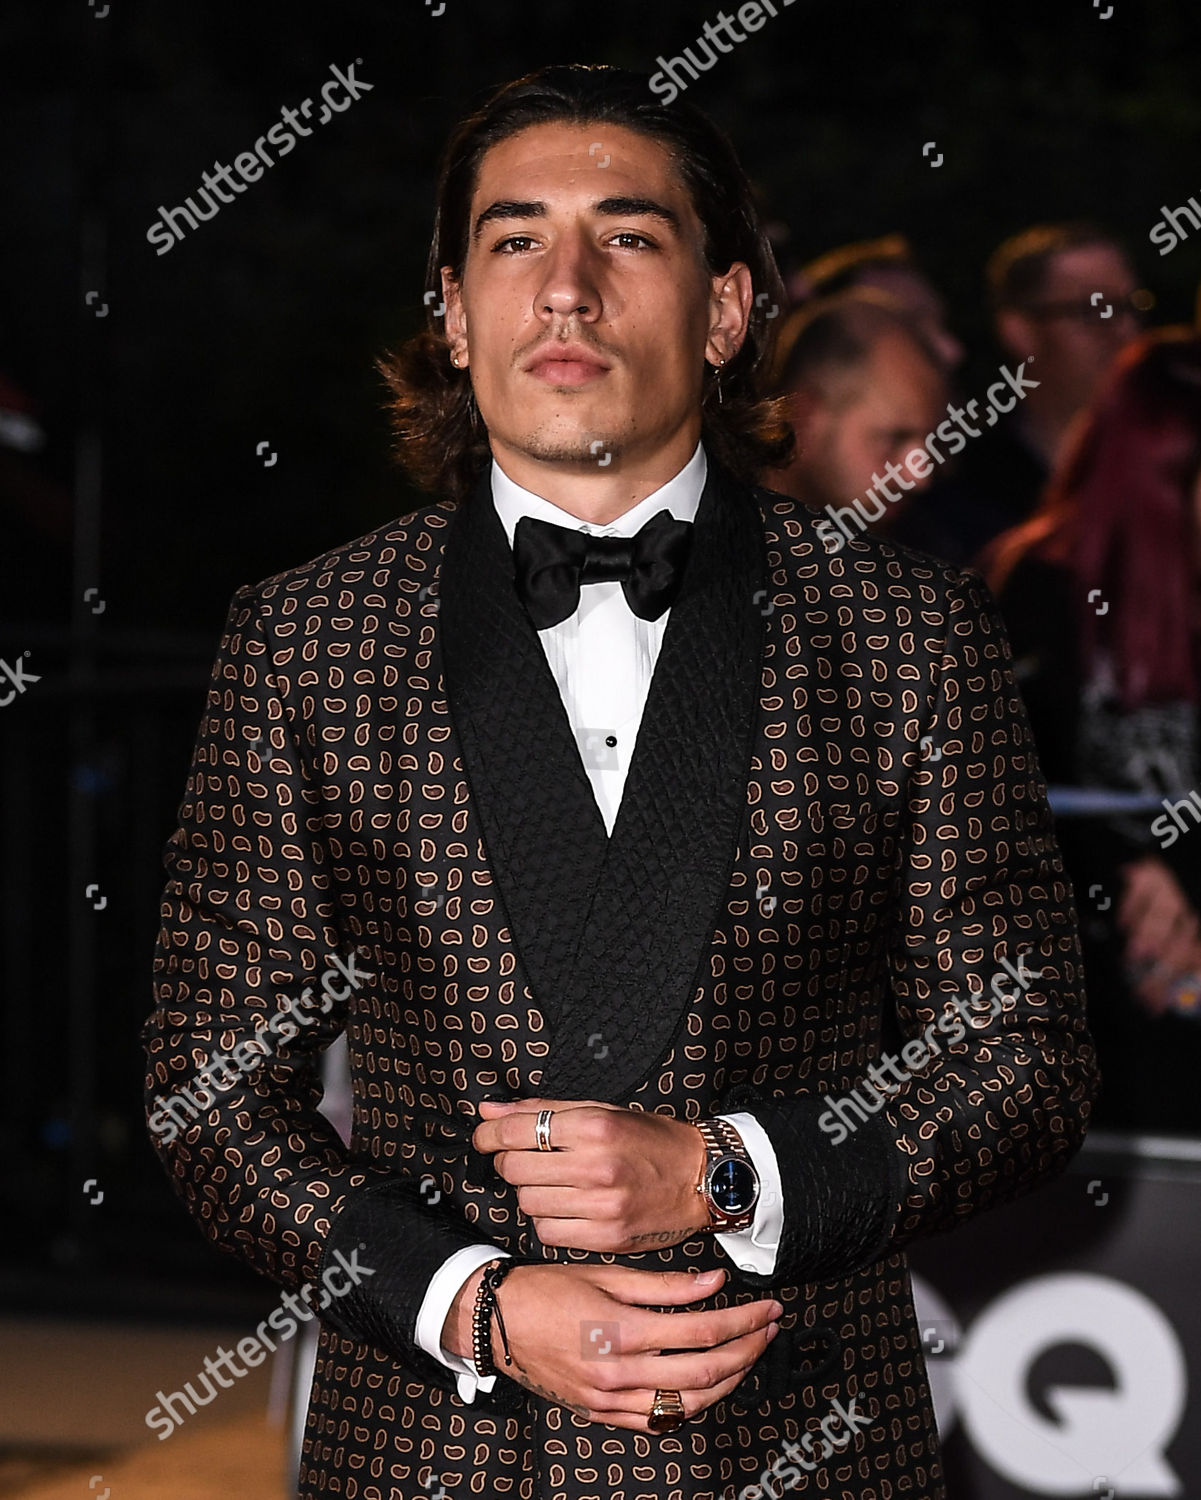 GQ Men of the Year Awards 2017 London, UK. Hector Bellerin at GQ Men of the